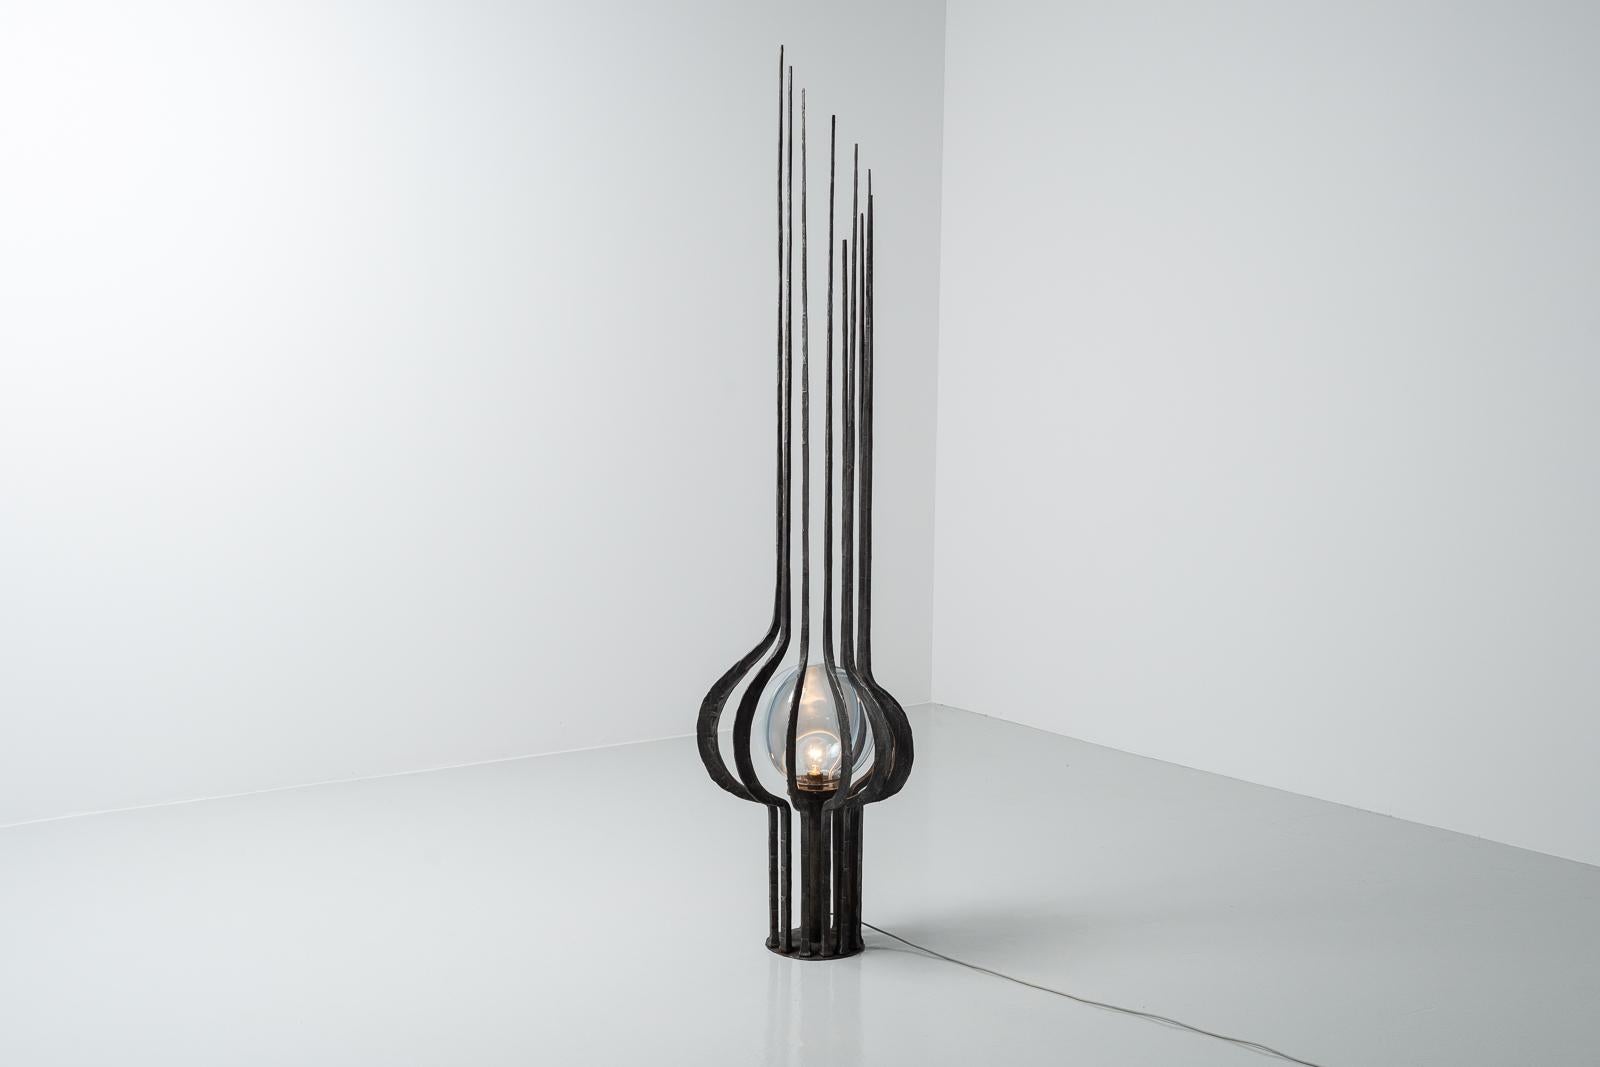 Monumental sized and very impressive brutalist floor lamp made by unknnown designer or manufacturer but has a glass sphere shade by Tony Zuccheri for Mazzega. The lamp was hand made in Italy, ca 1970s. It is made of solid wrought iron hammered